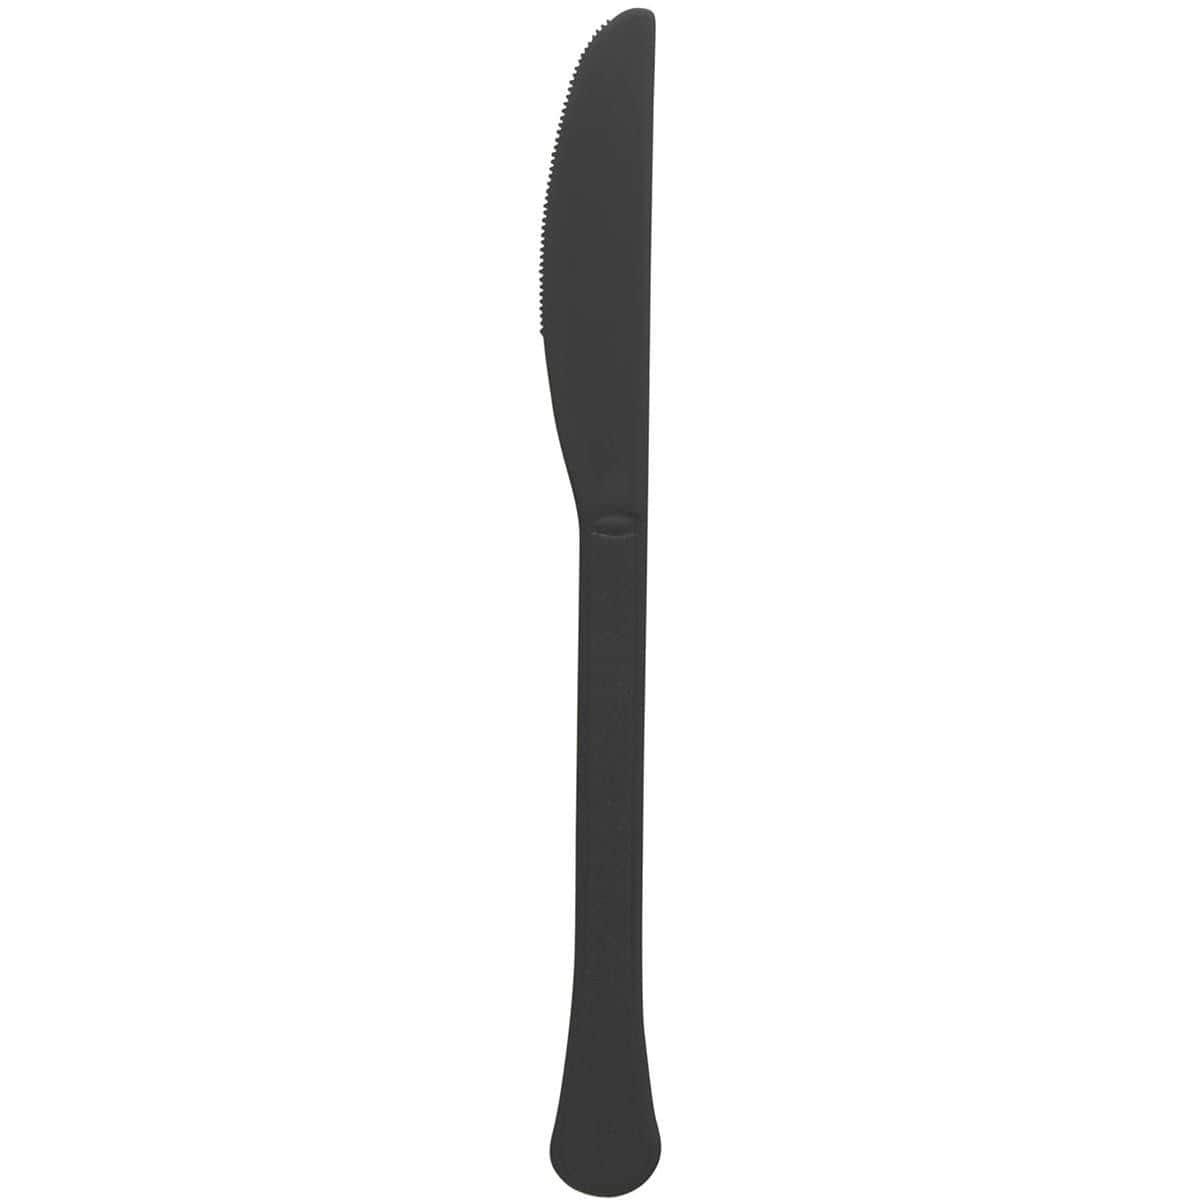 Buy Plasticware Jet Black Plastic Knives, 20 Count sold at Party Expert